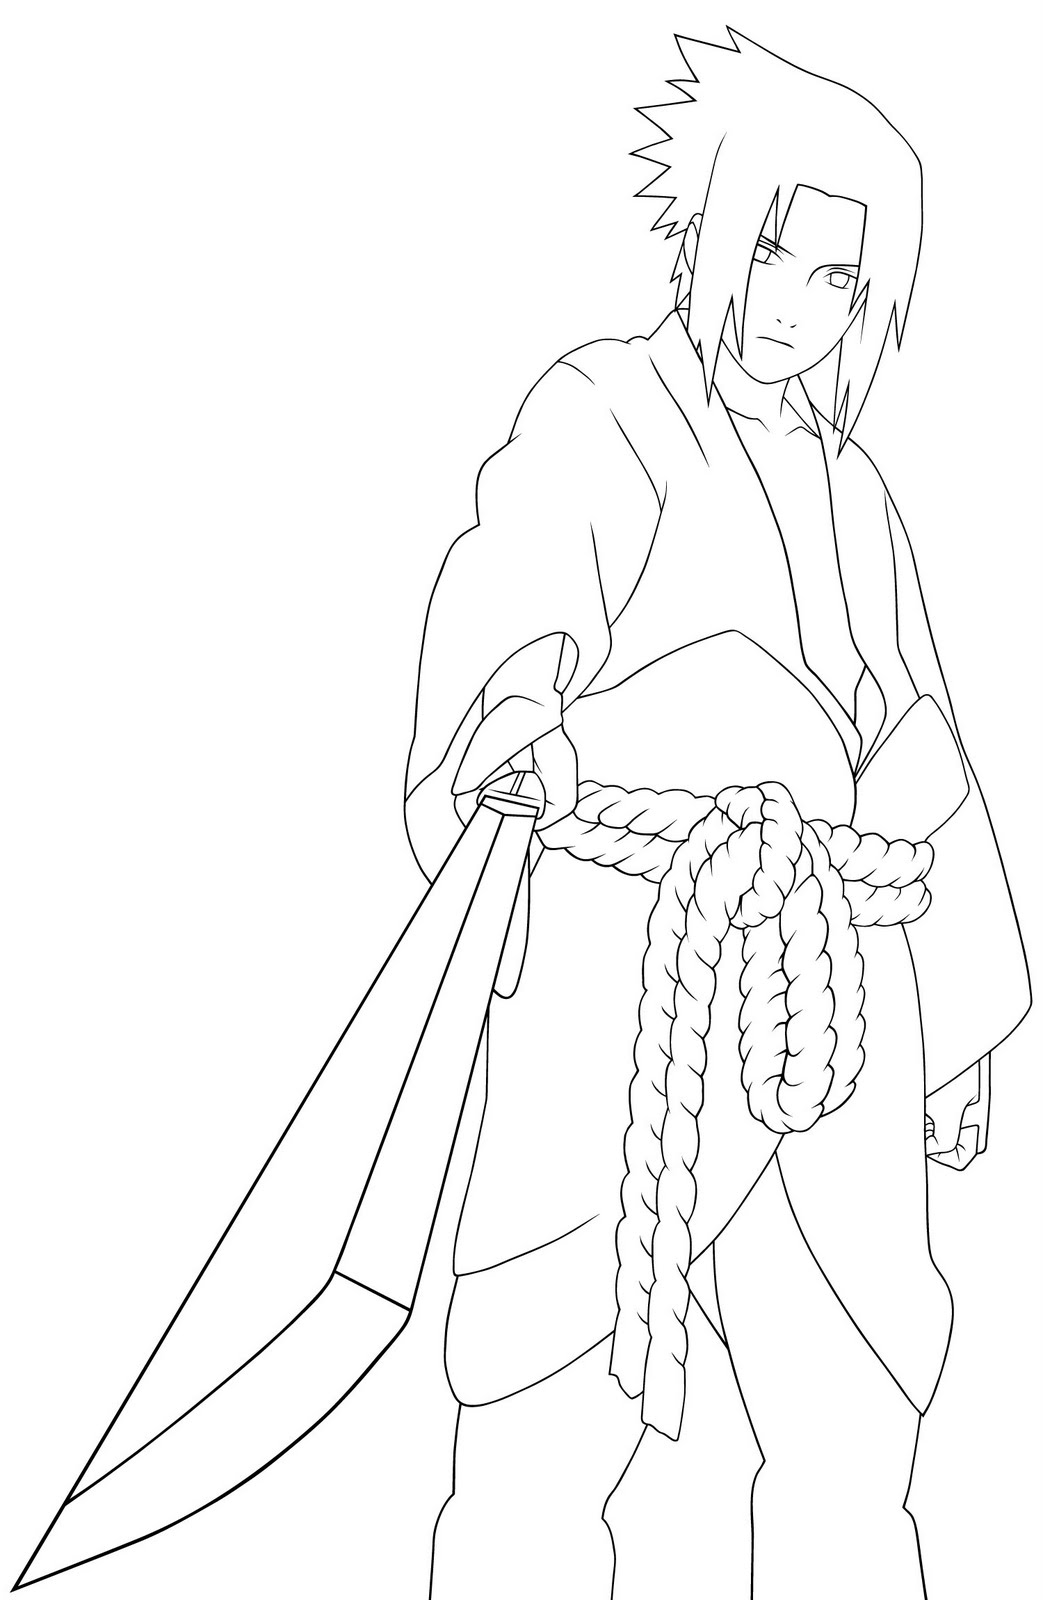 Download Printable Coloring Pages: Naruto Coloring Pages